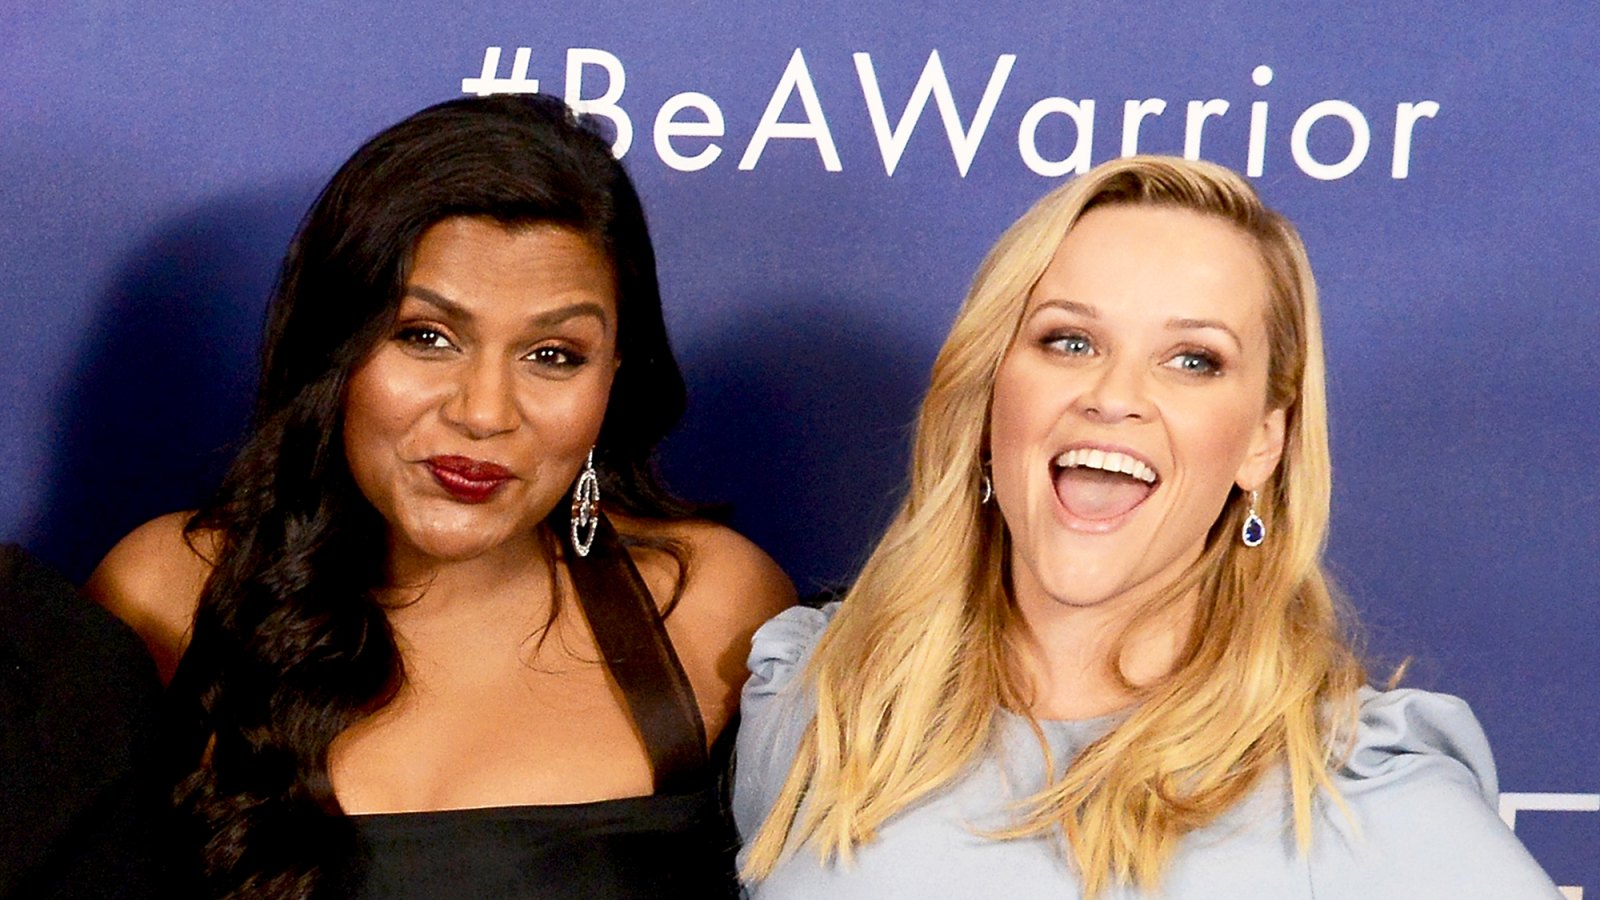 Mindy Kaling and Reese Witherspoon attend the 2018 European premiere of 'A Wrinkle In Time' at BFI IMAX in London, England.